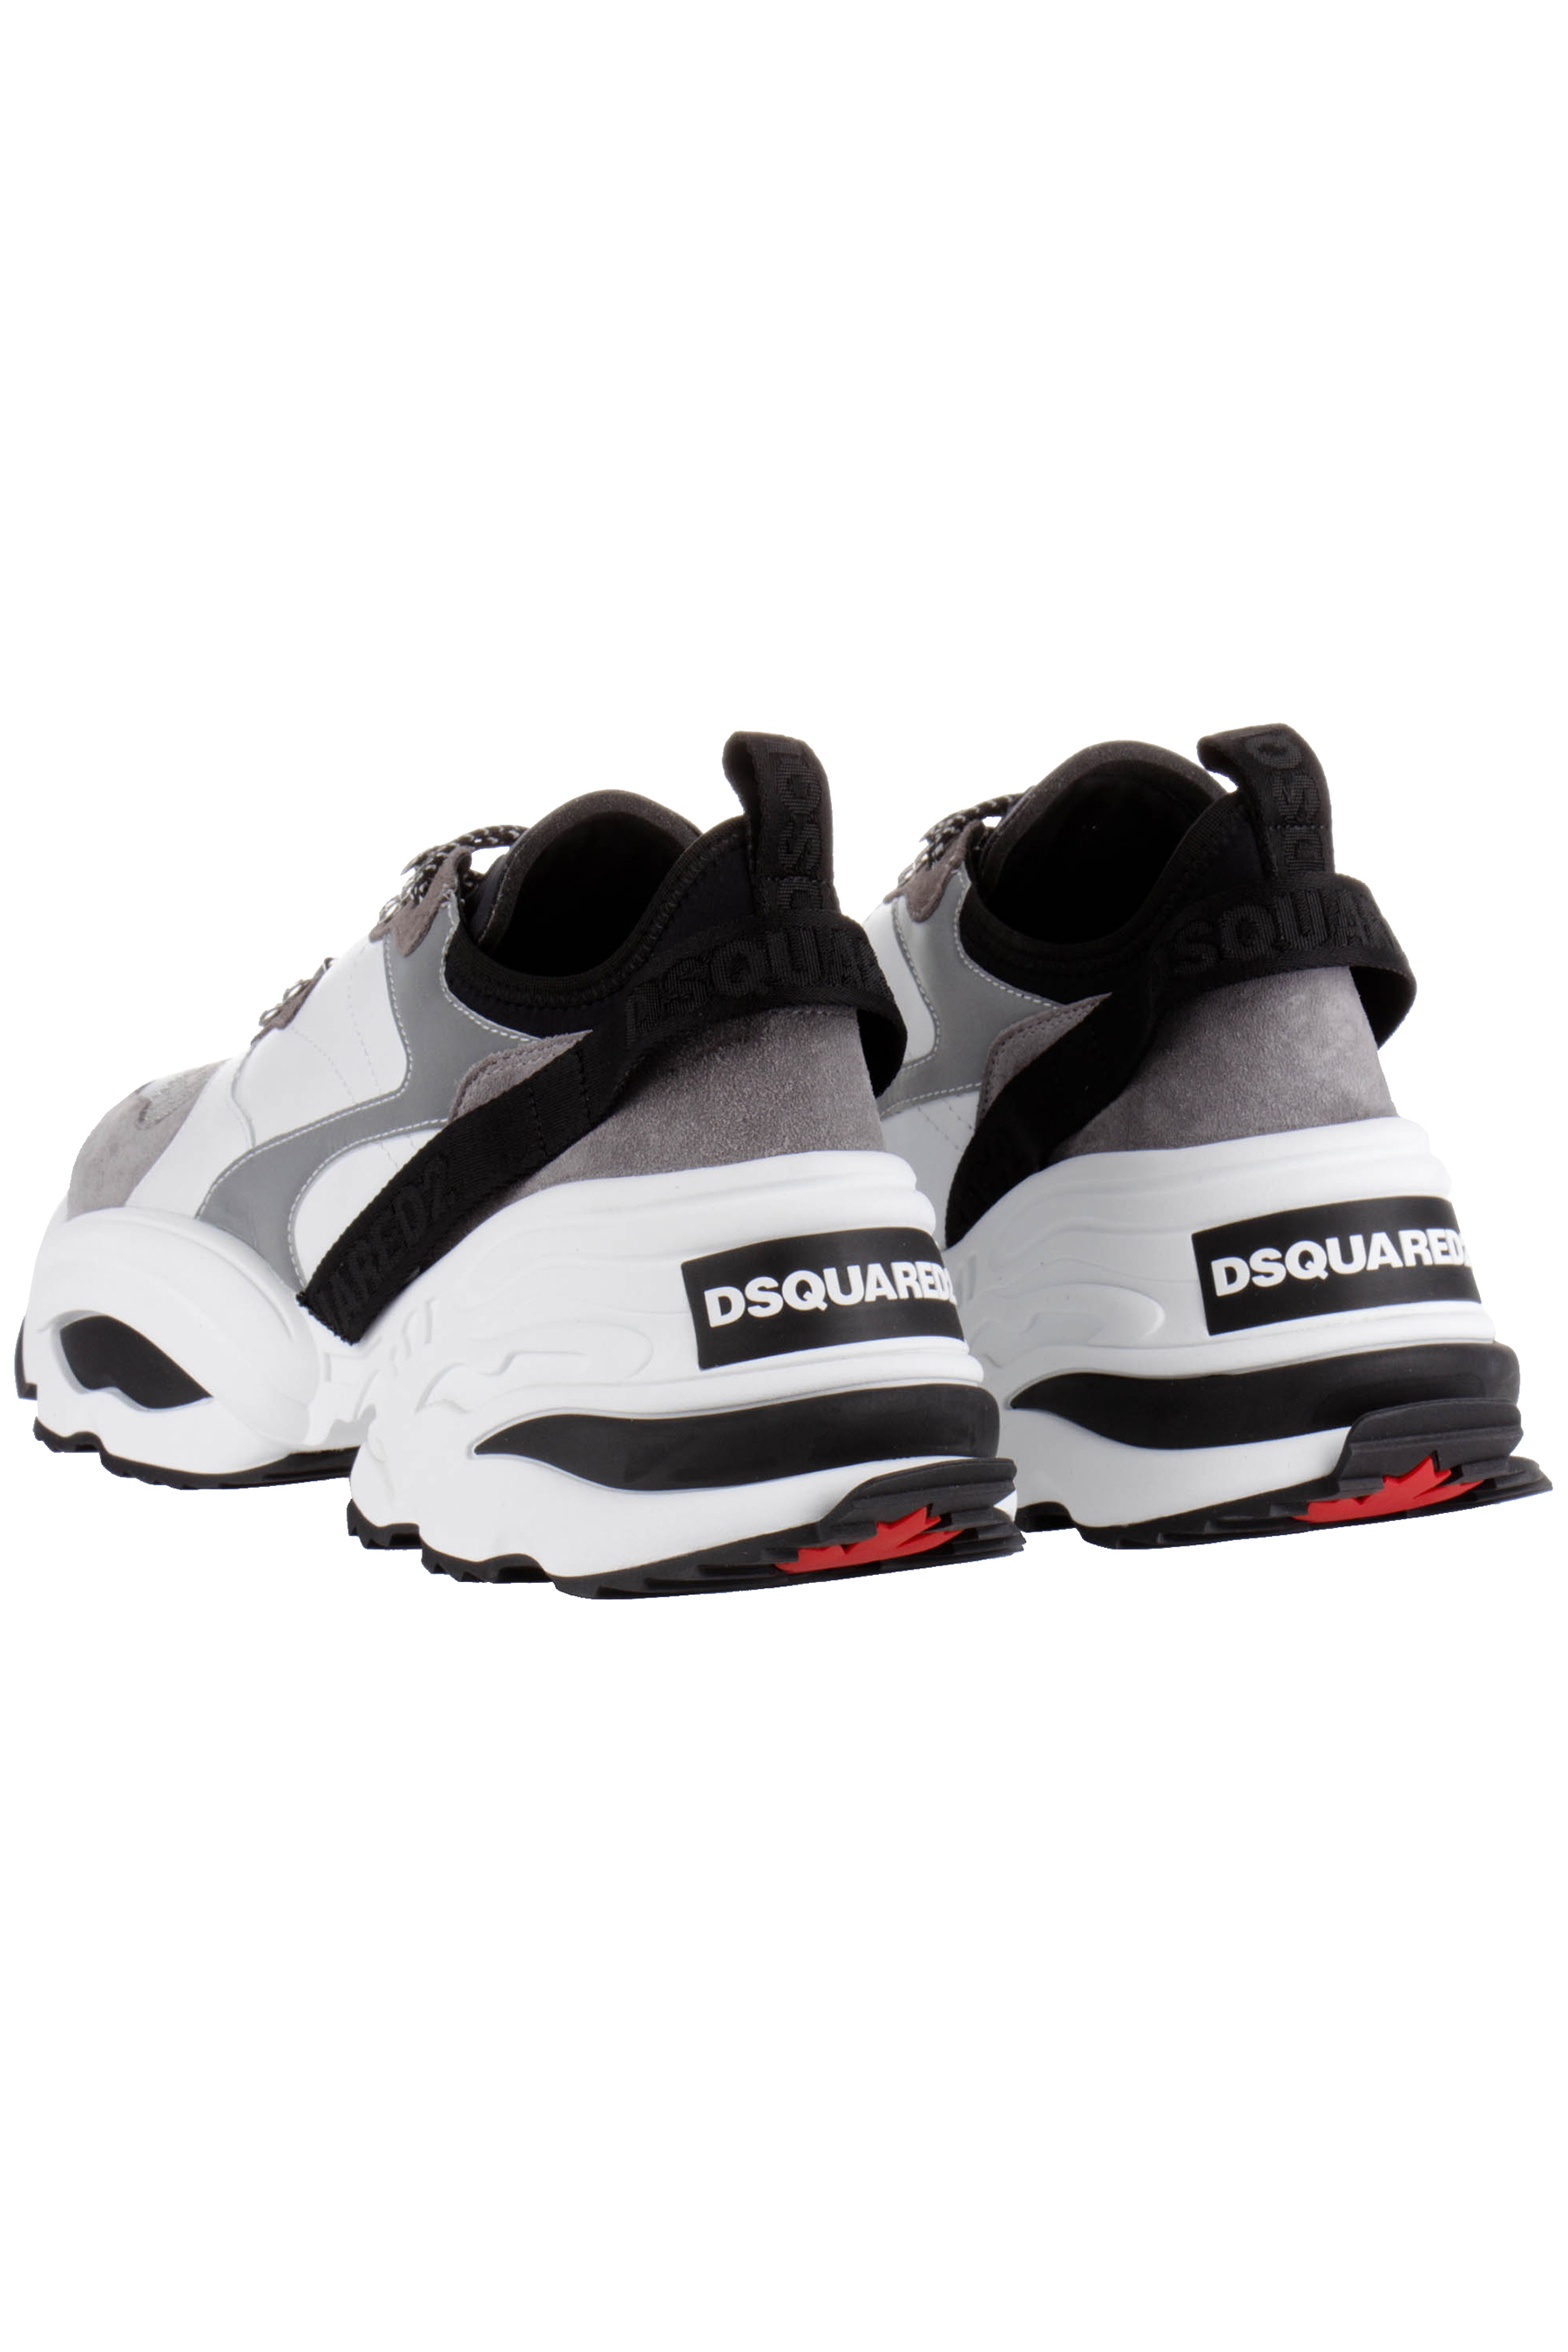 dsquared sneakers